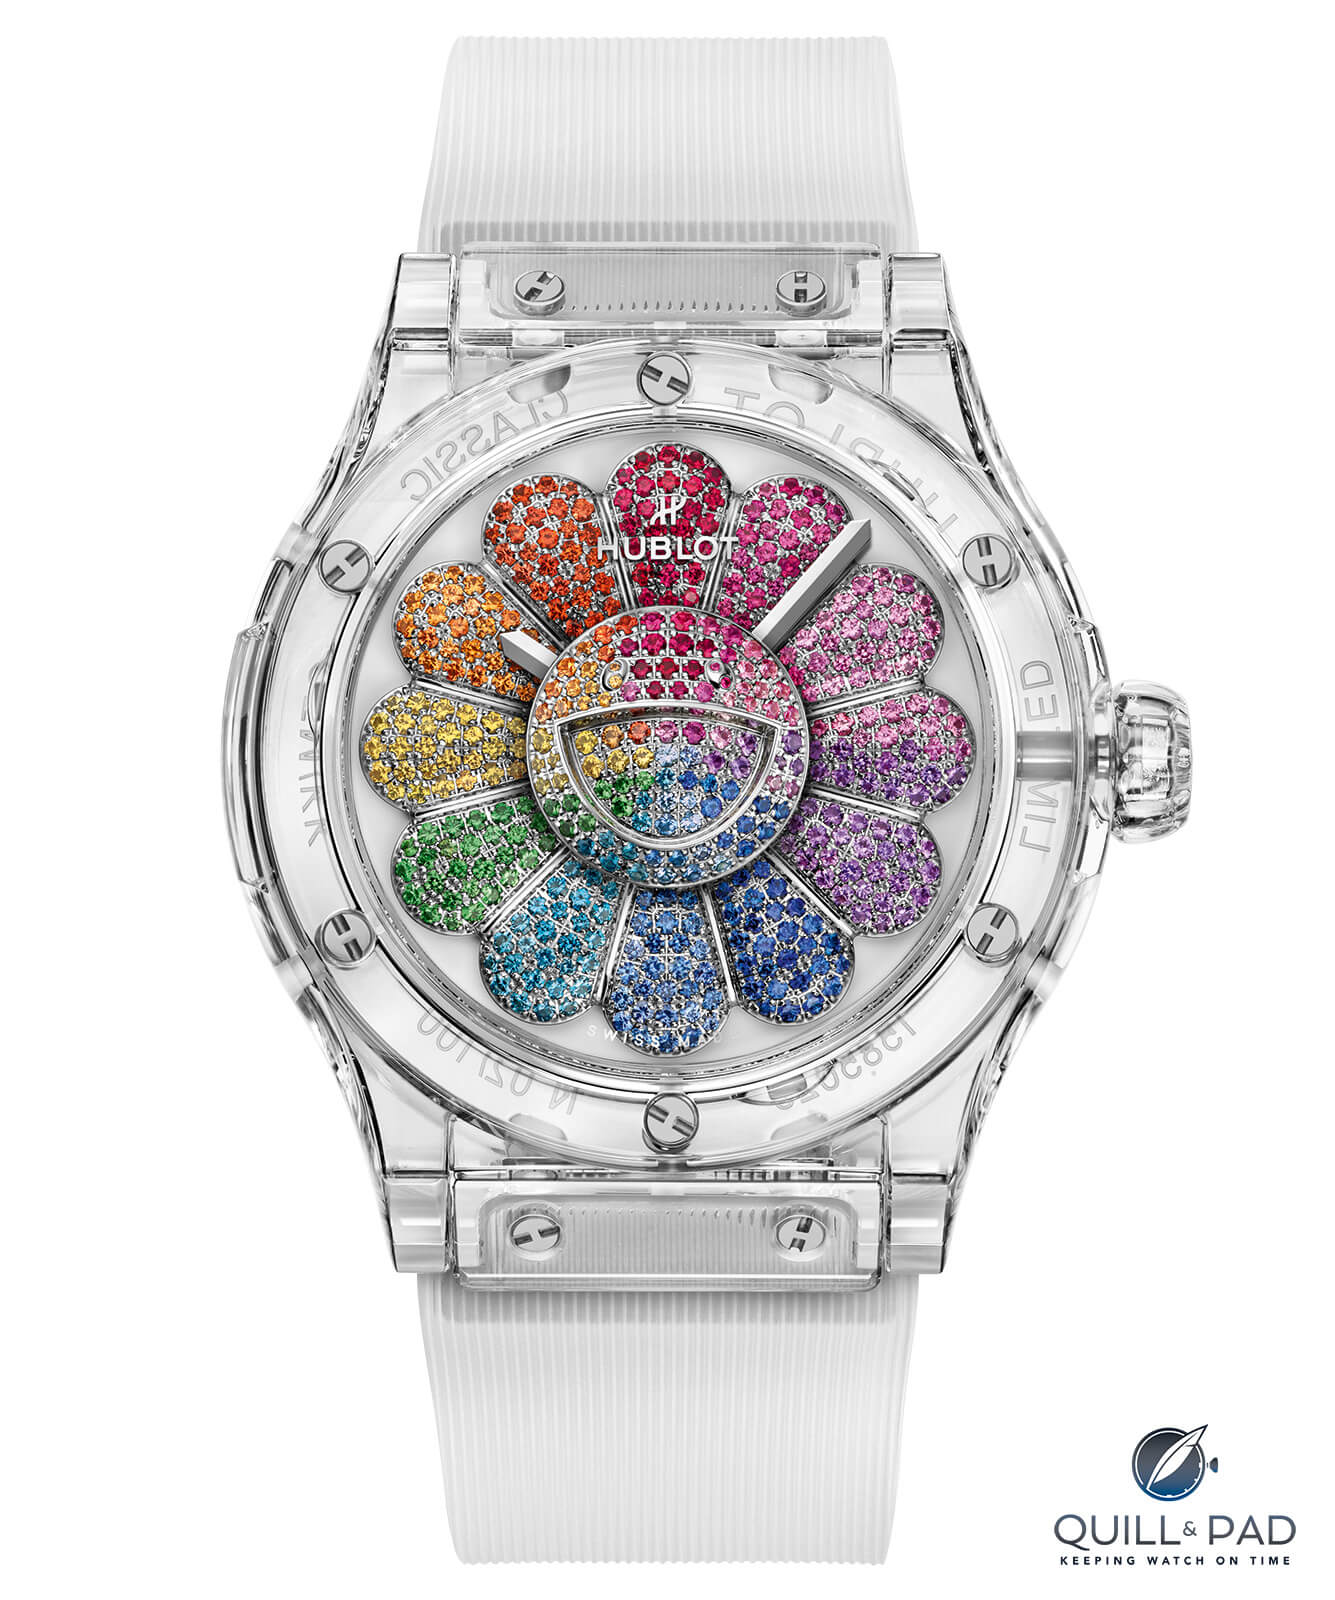 Takashi Murakami's Smiling Flower Becomes a Hublot Watch - The New York  Times